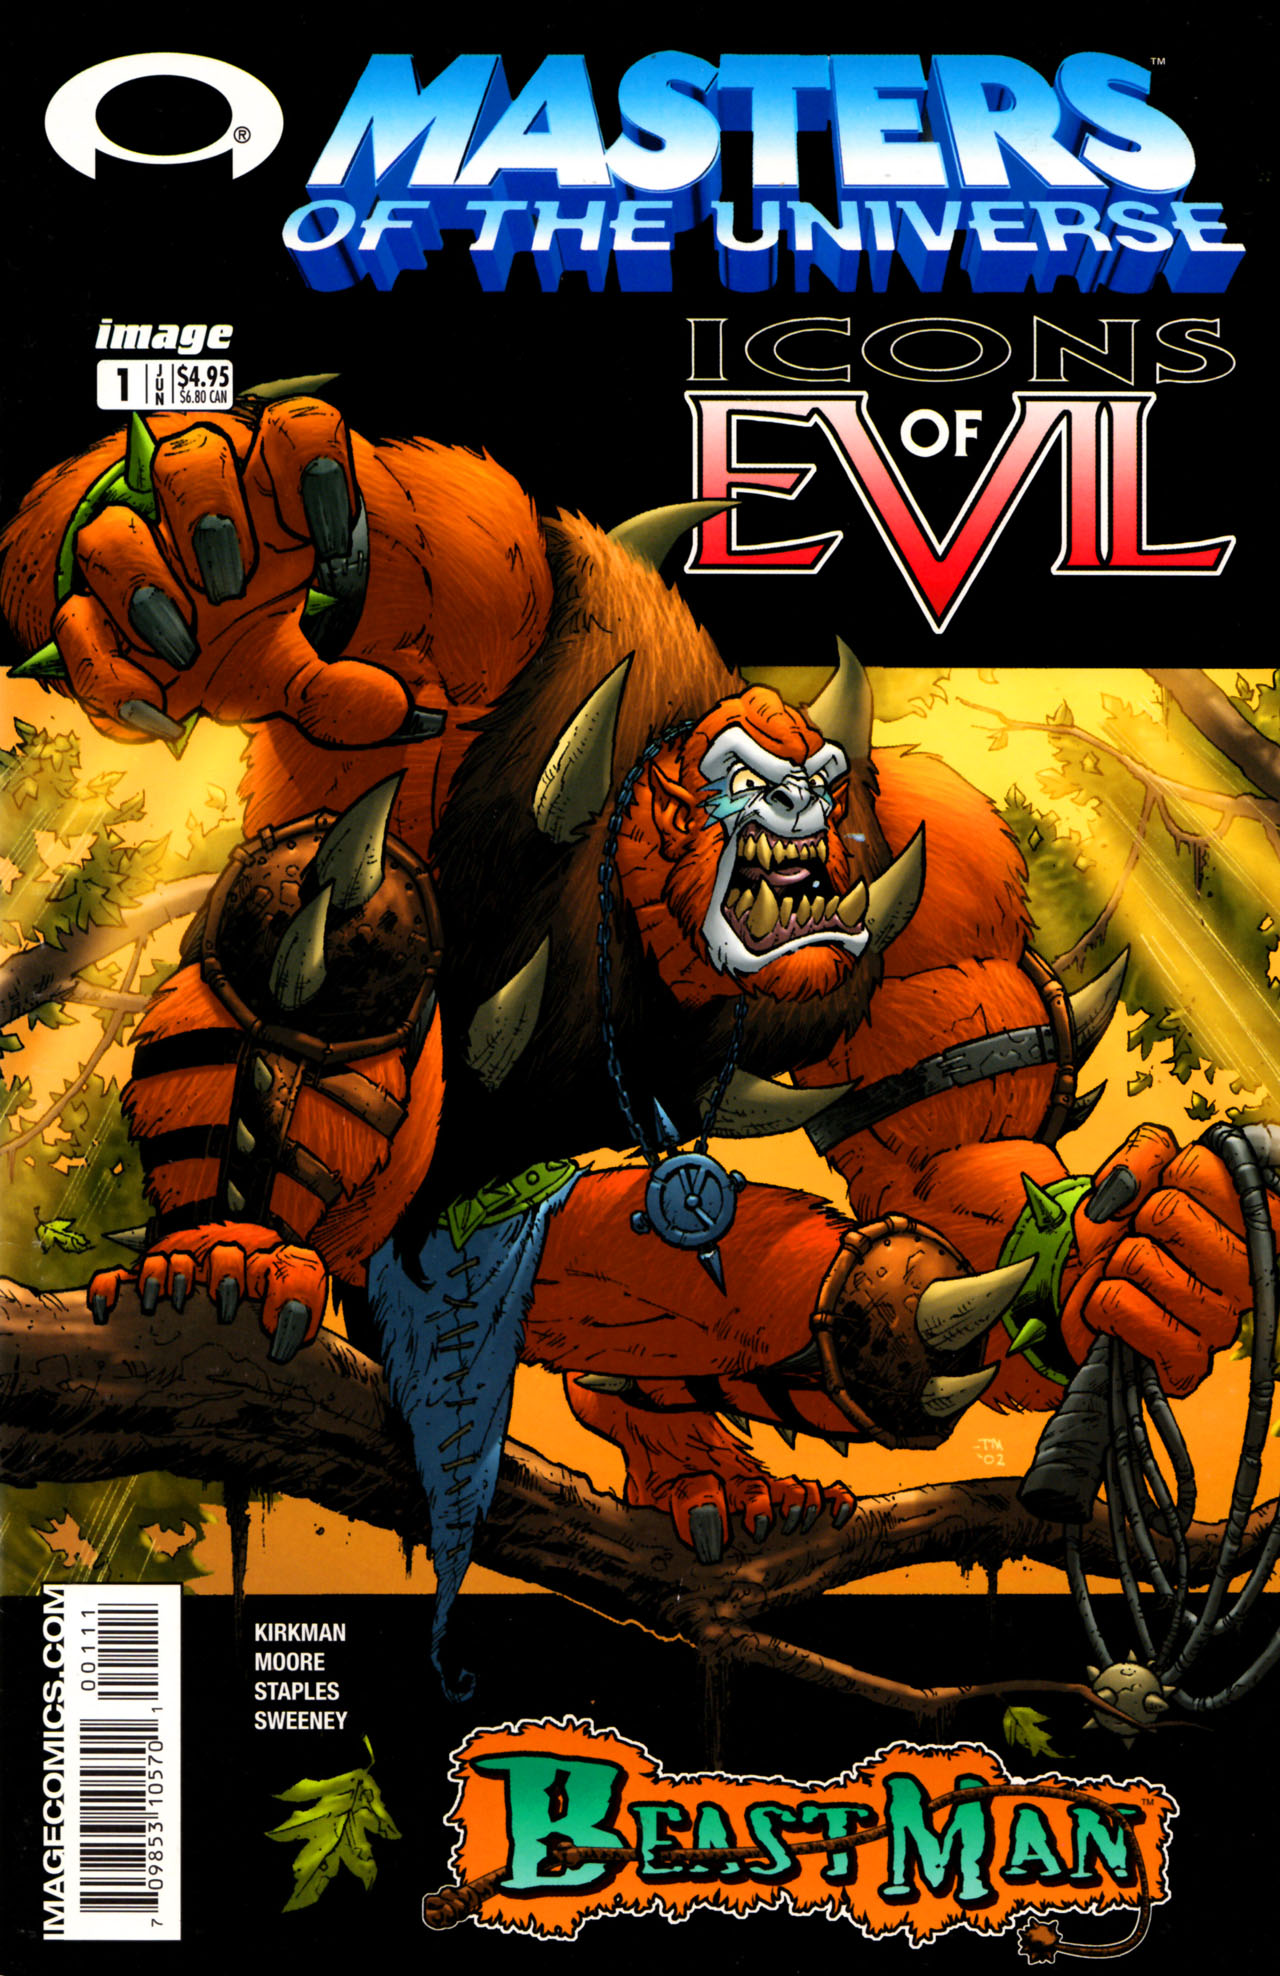 Read online Masters of the Universe: Icons of Evil comic -  Issue # Beastman - 1